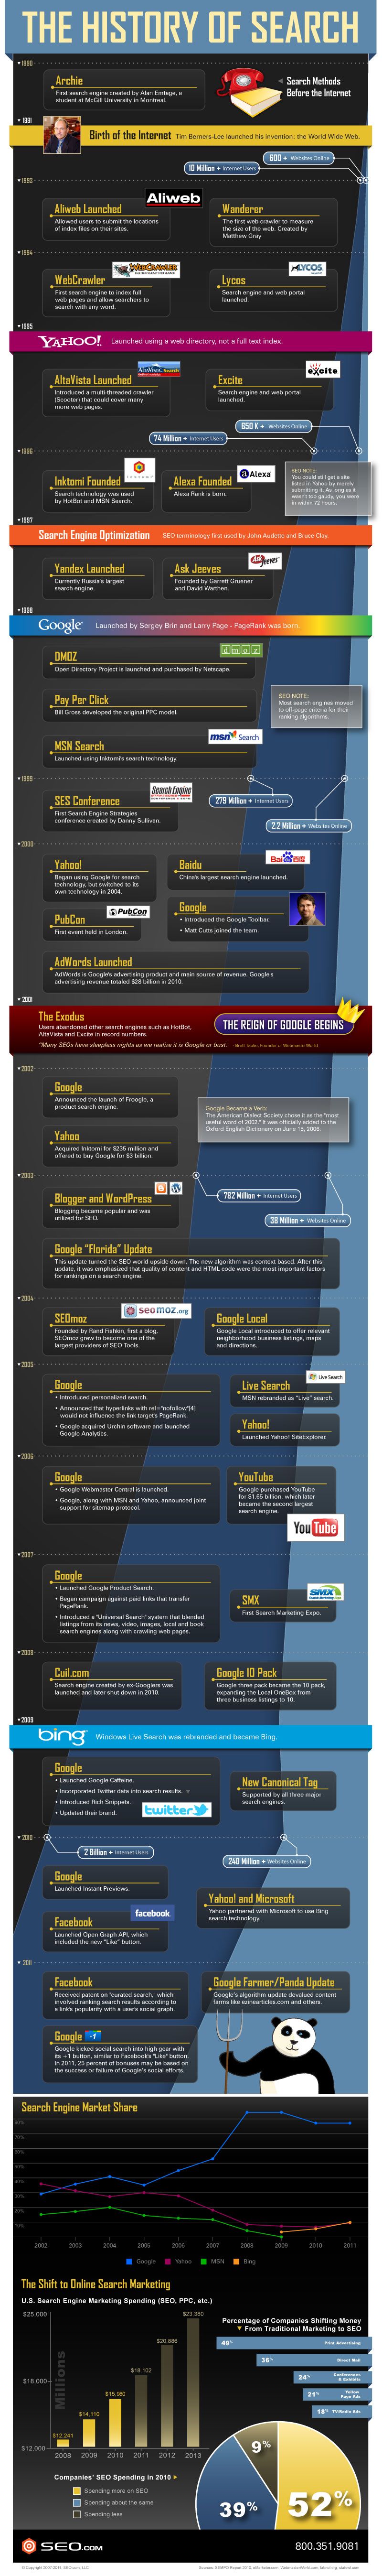 The History of Search Infographic